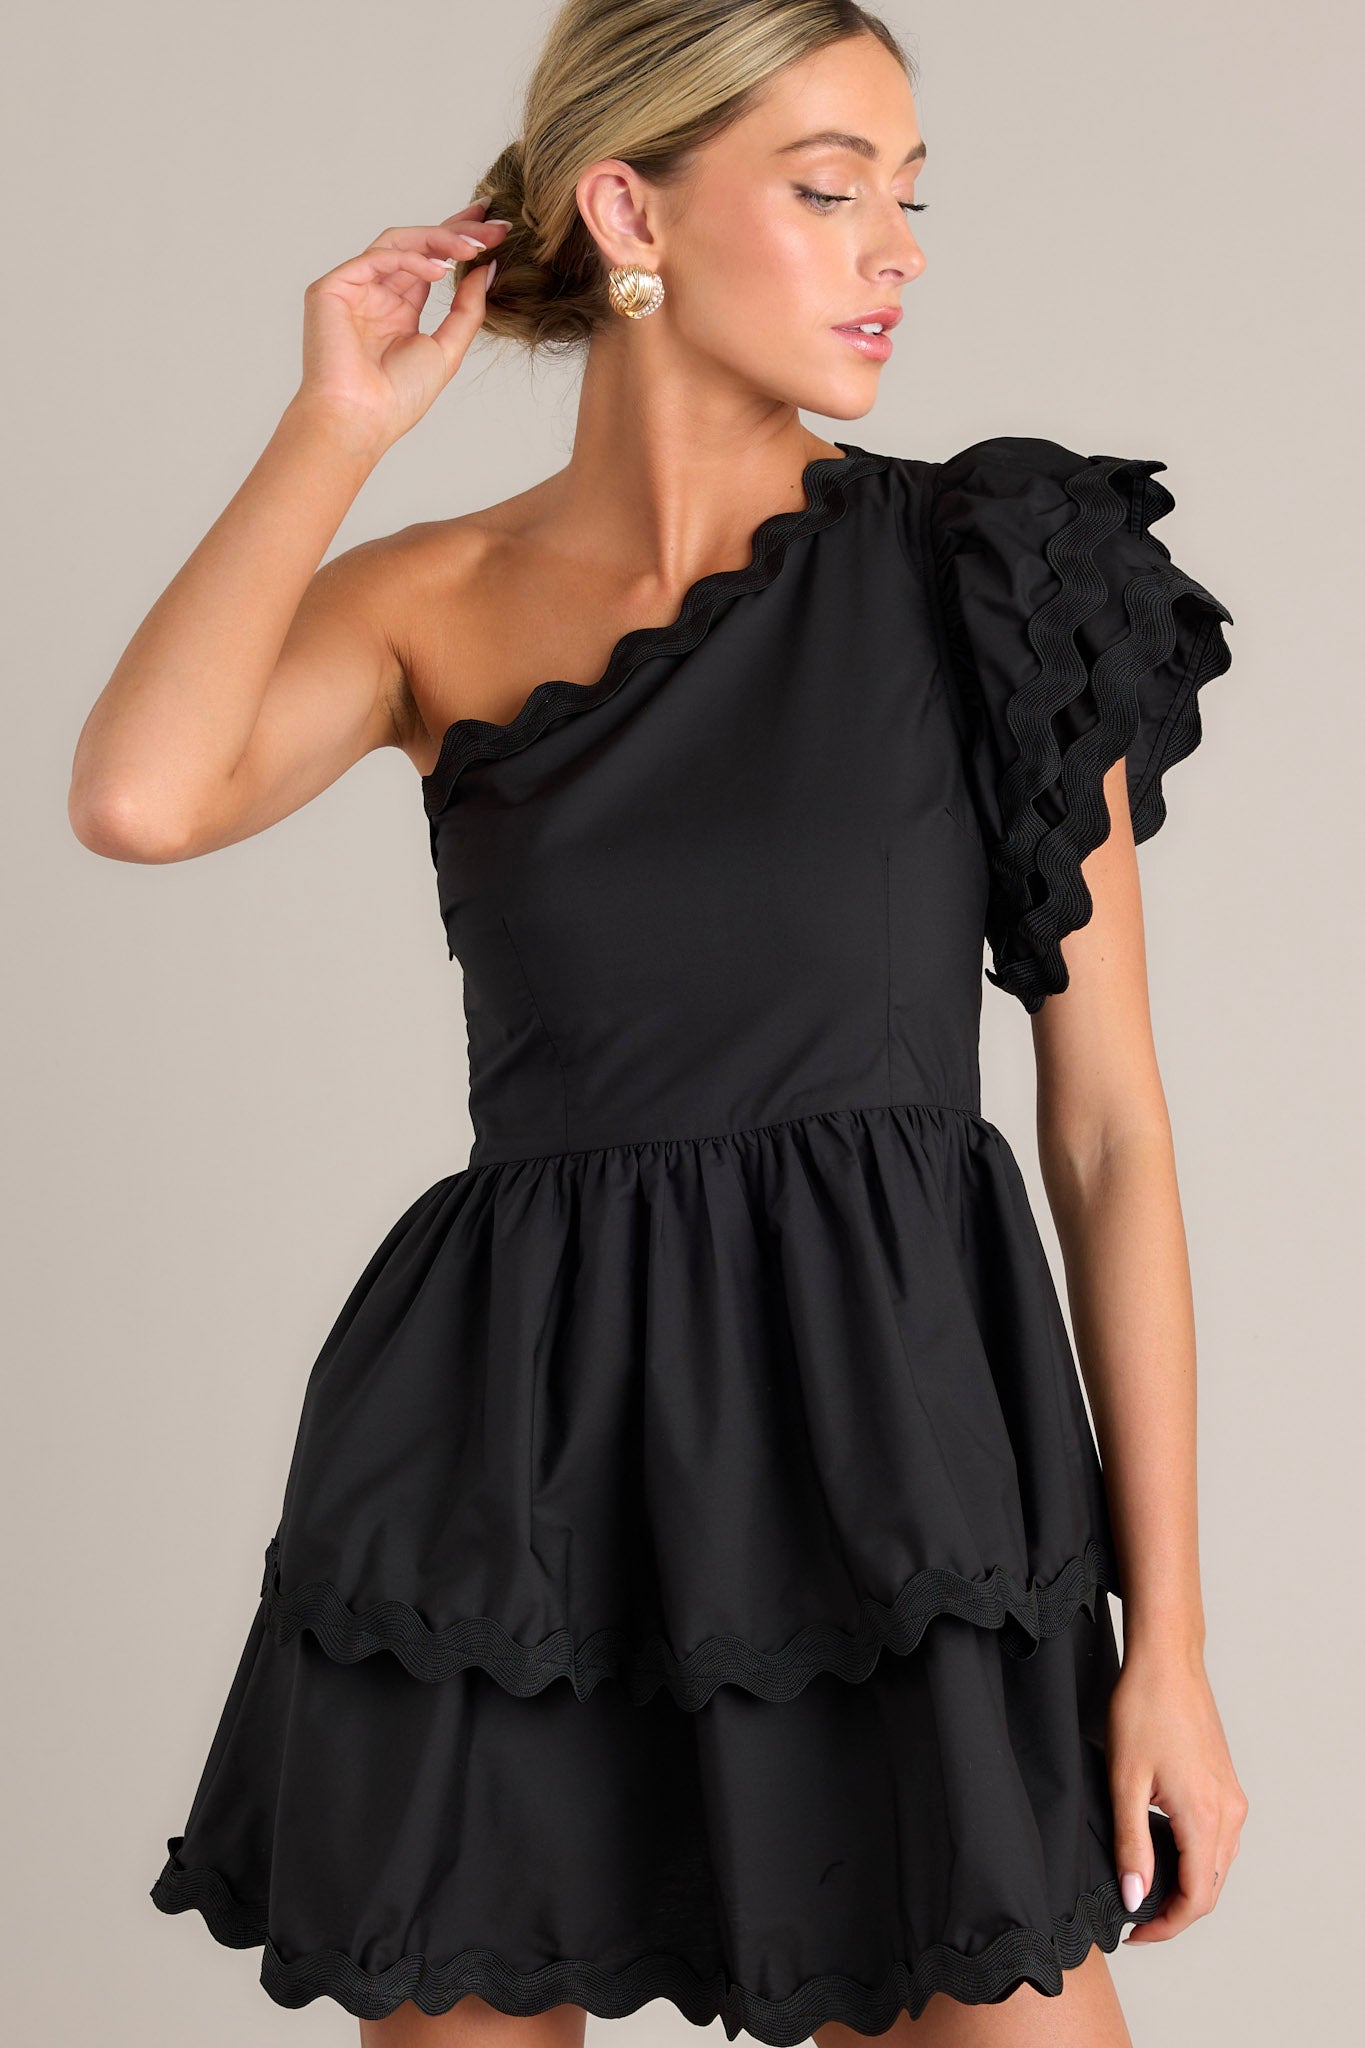 This black romper features rick rack scalloped hems, a one shoulder neckline, a flutter sleeve, a side zipper closure, and a tiered skirt with built in shorts.